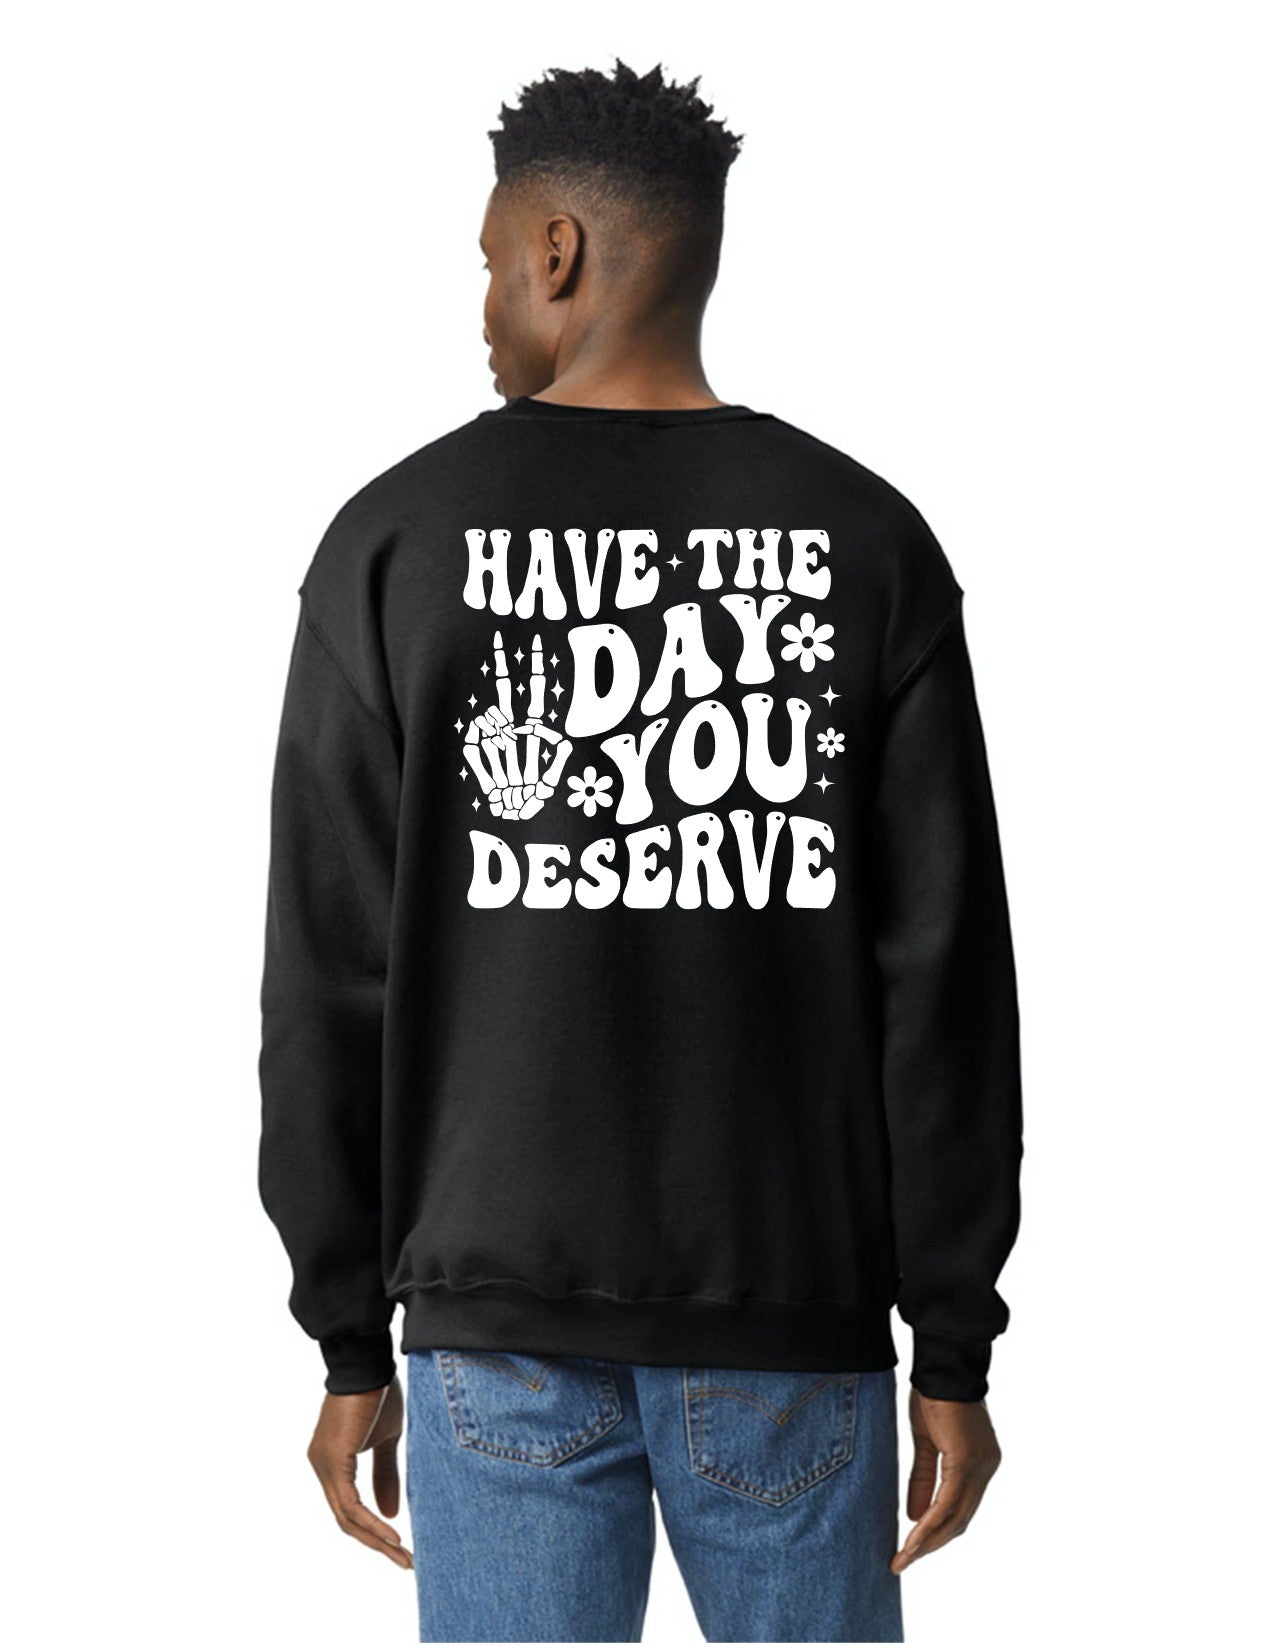 Have The Day You Deserve Shirts